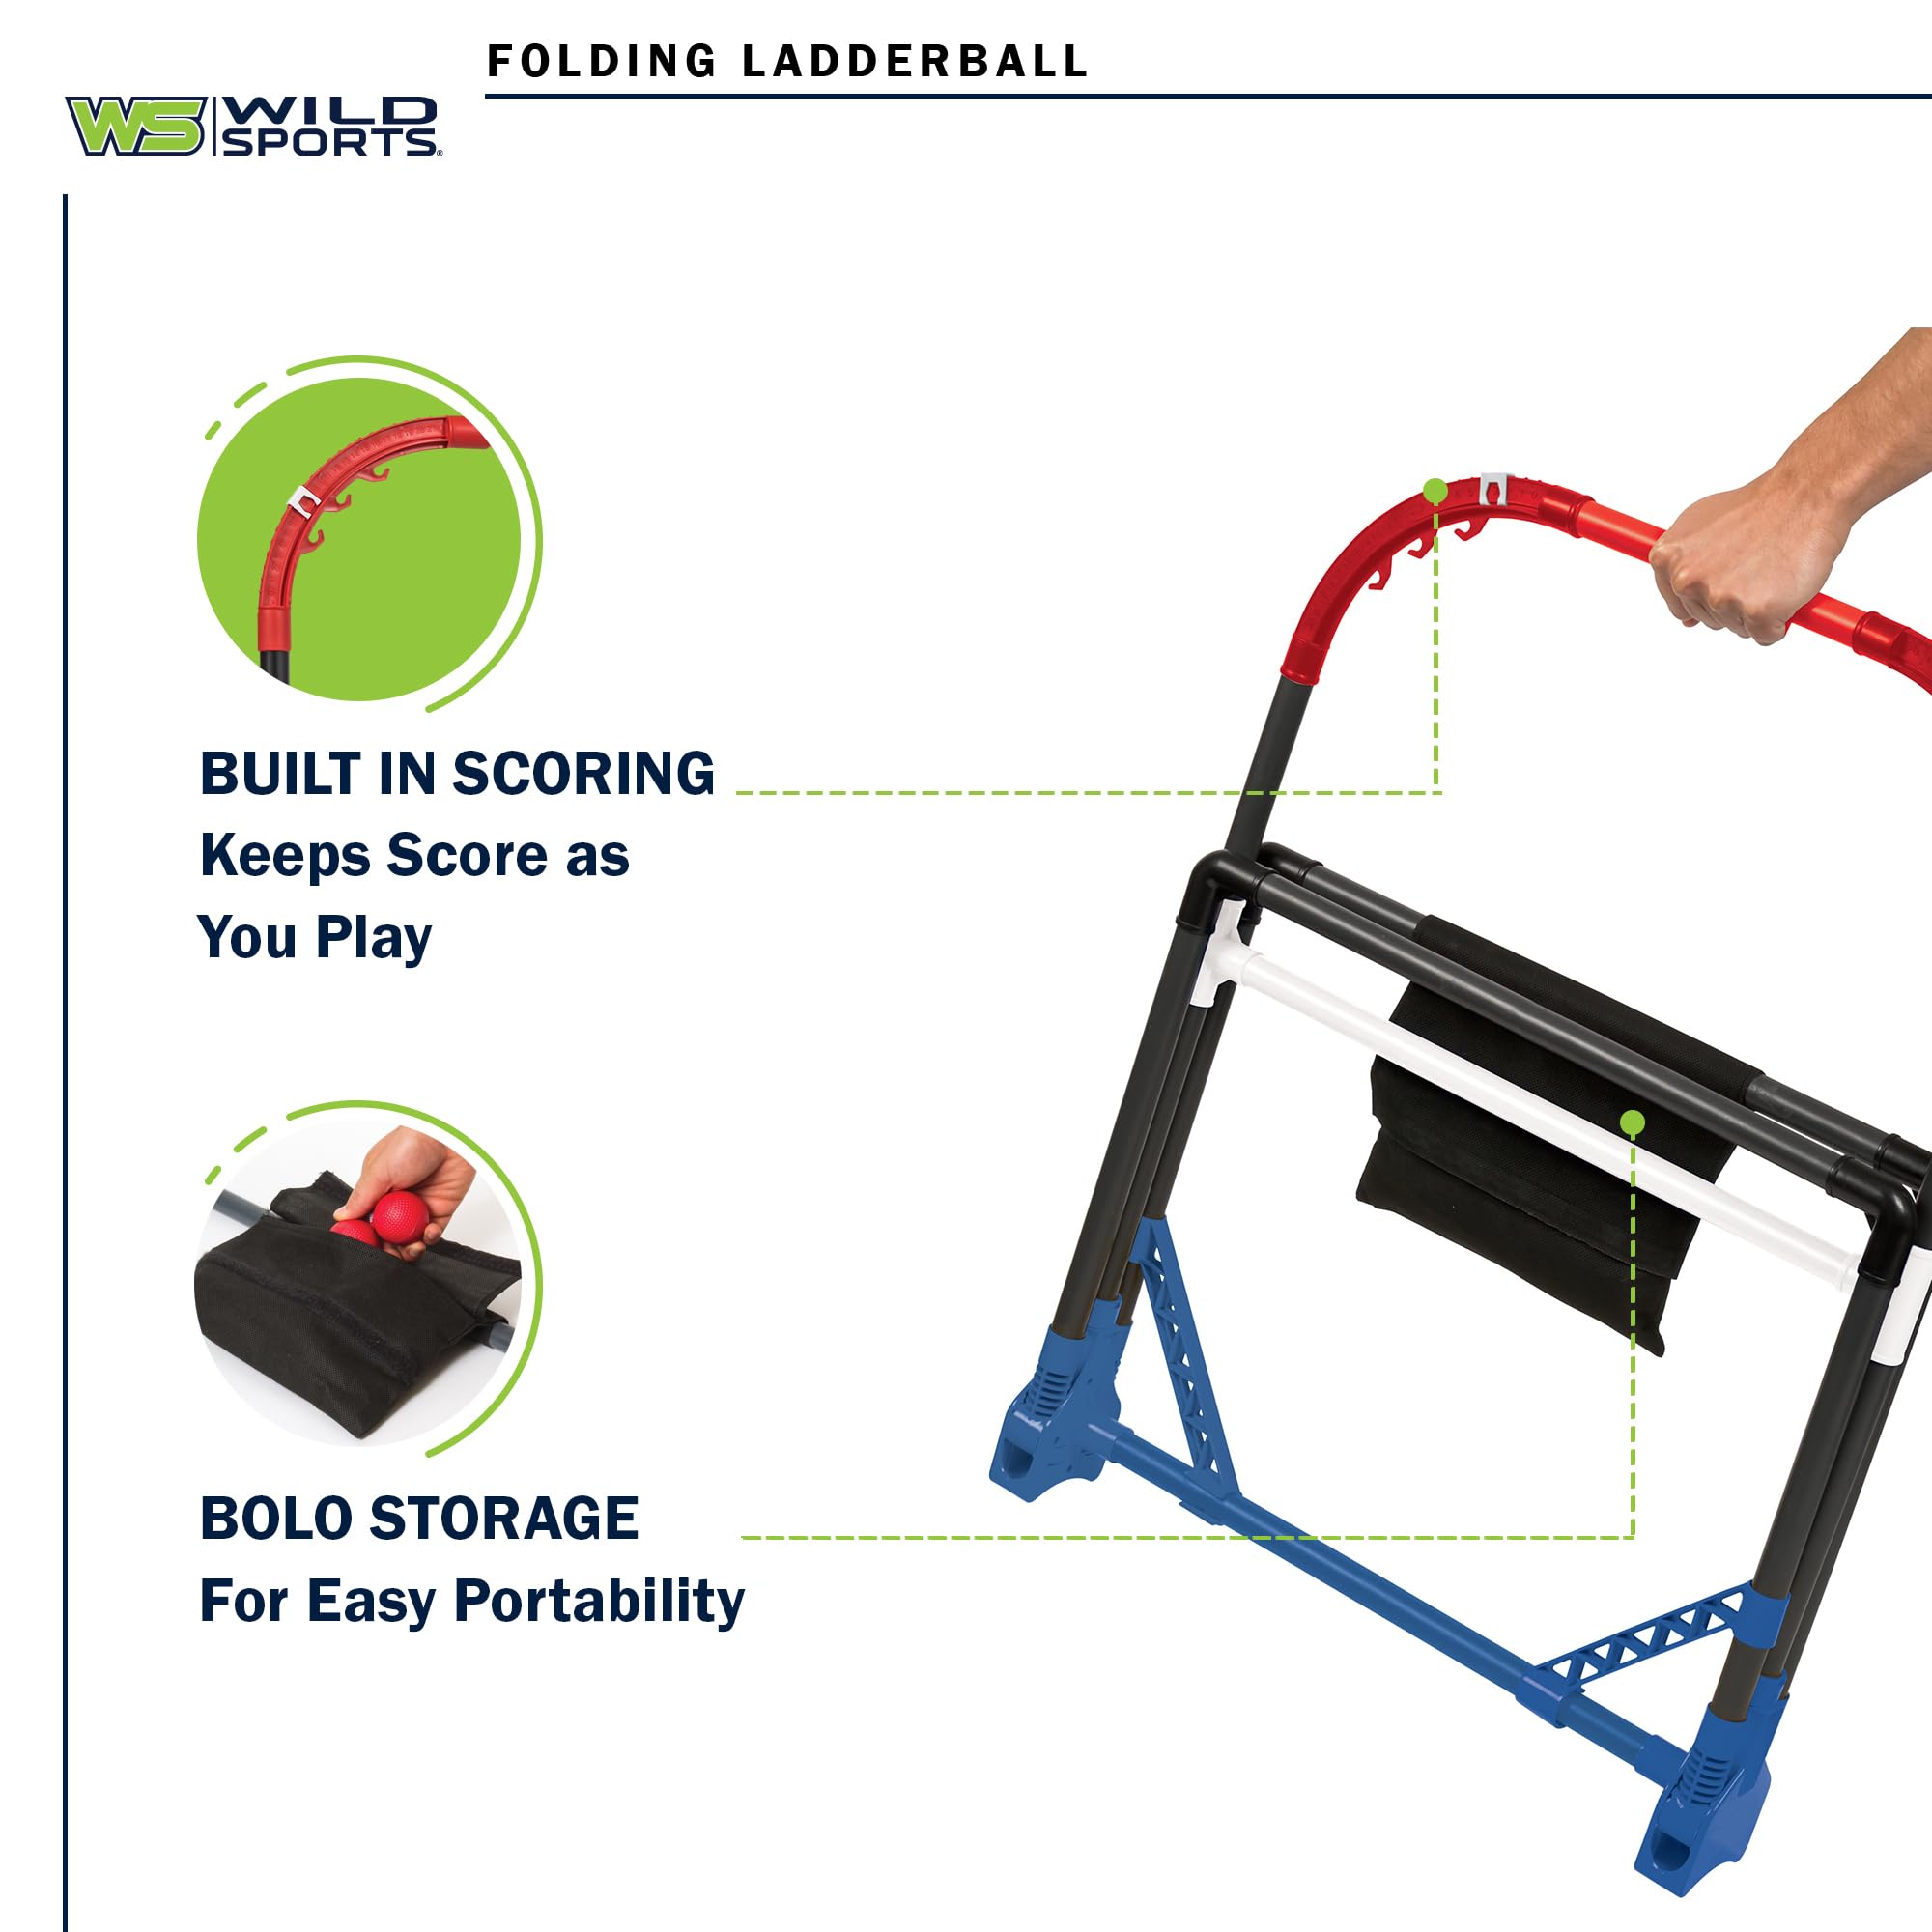 Wild Sports Folding Ladderball Set - Lightweight and Portable Outdoor Game - Includes 6 Bolos